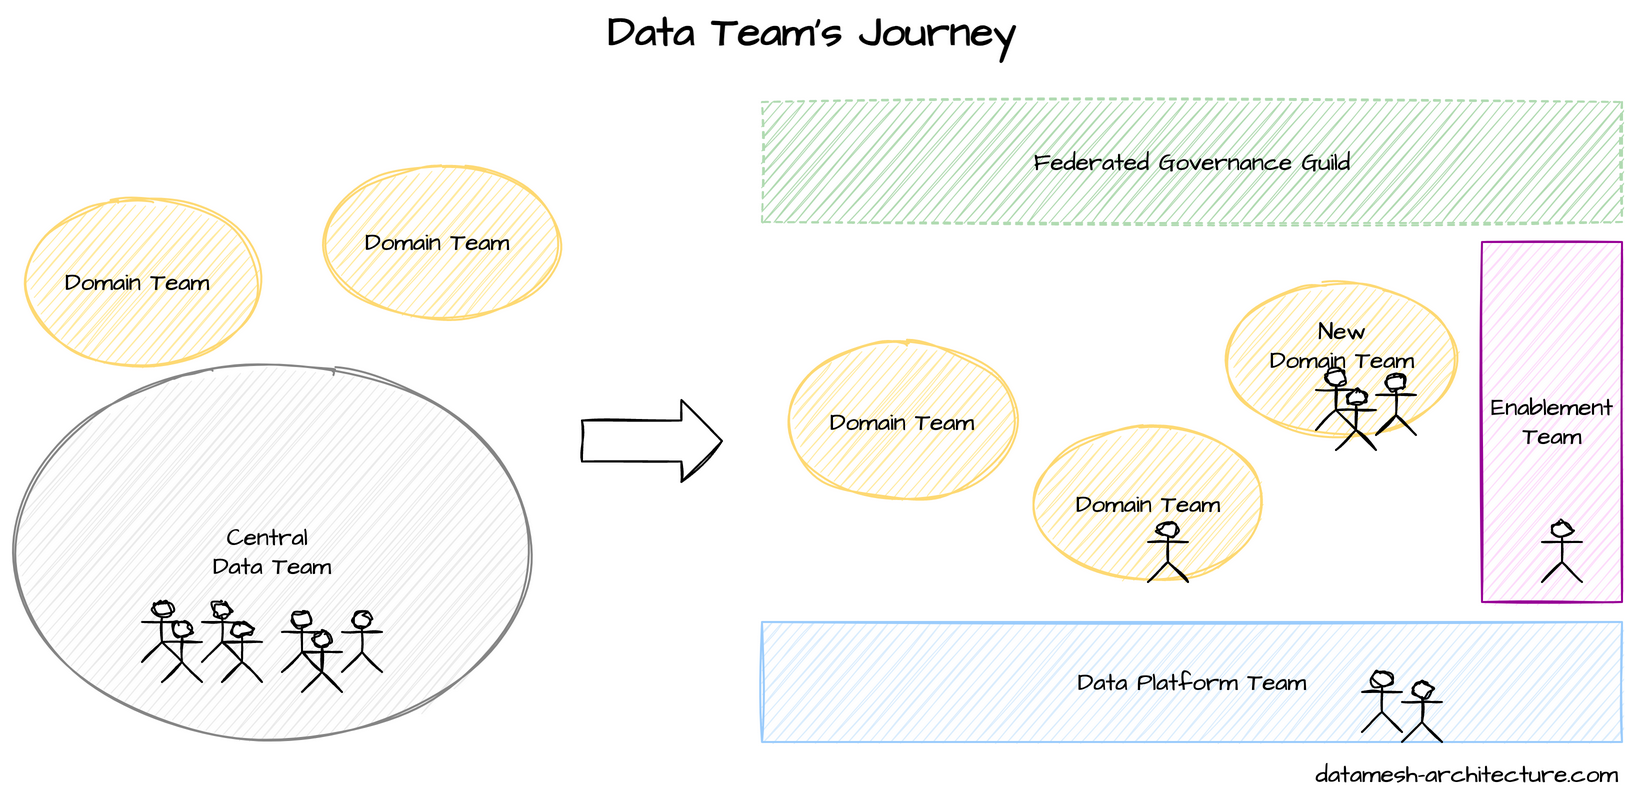 Data Team's Journey: From a central data team toward an enablement team, data platform team, and (new) domain teams with data expertise